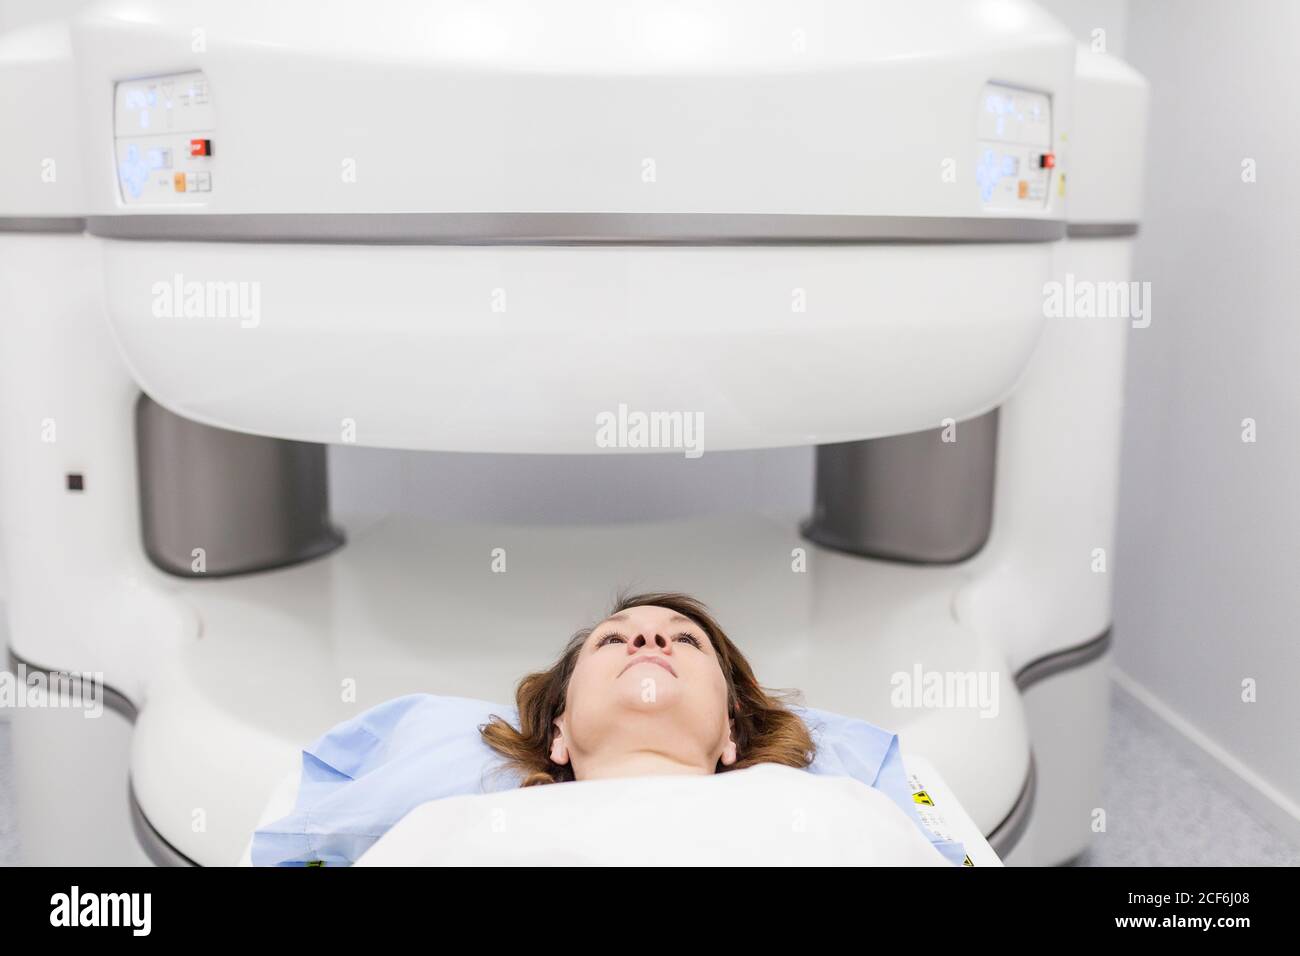 middle-aged Woman on an open MRI machine waiting for the test to begin Stock Photo